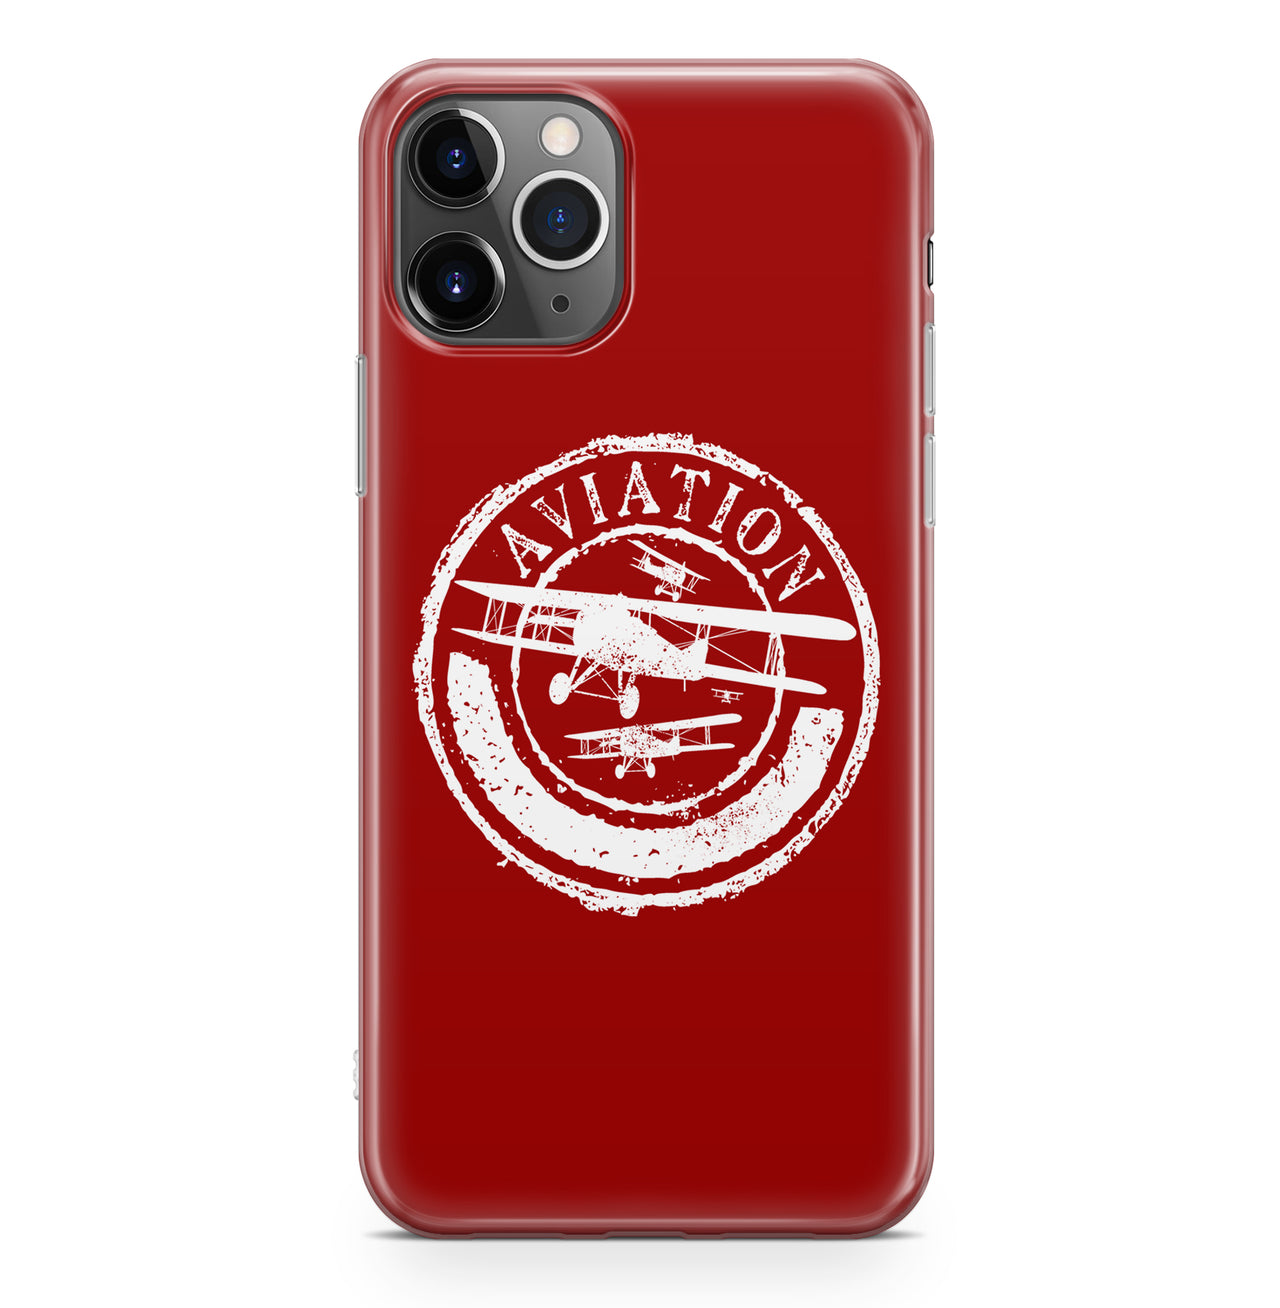 Aviation Lovers Designed iPhone Cases